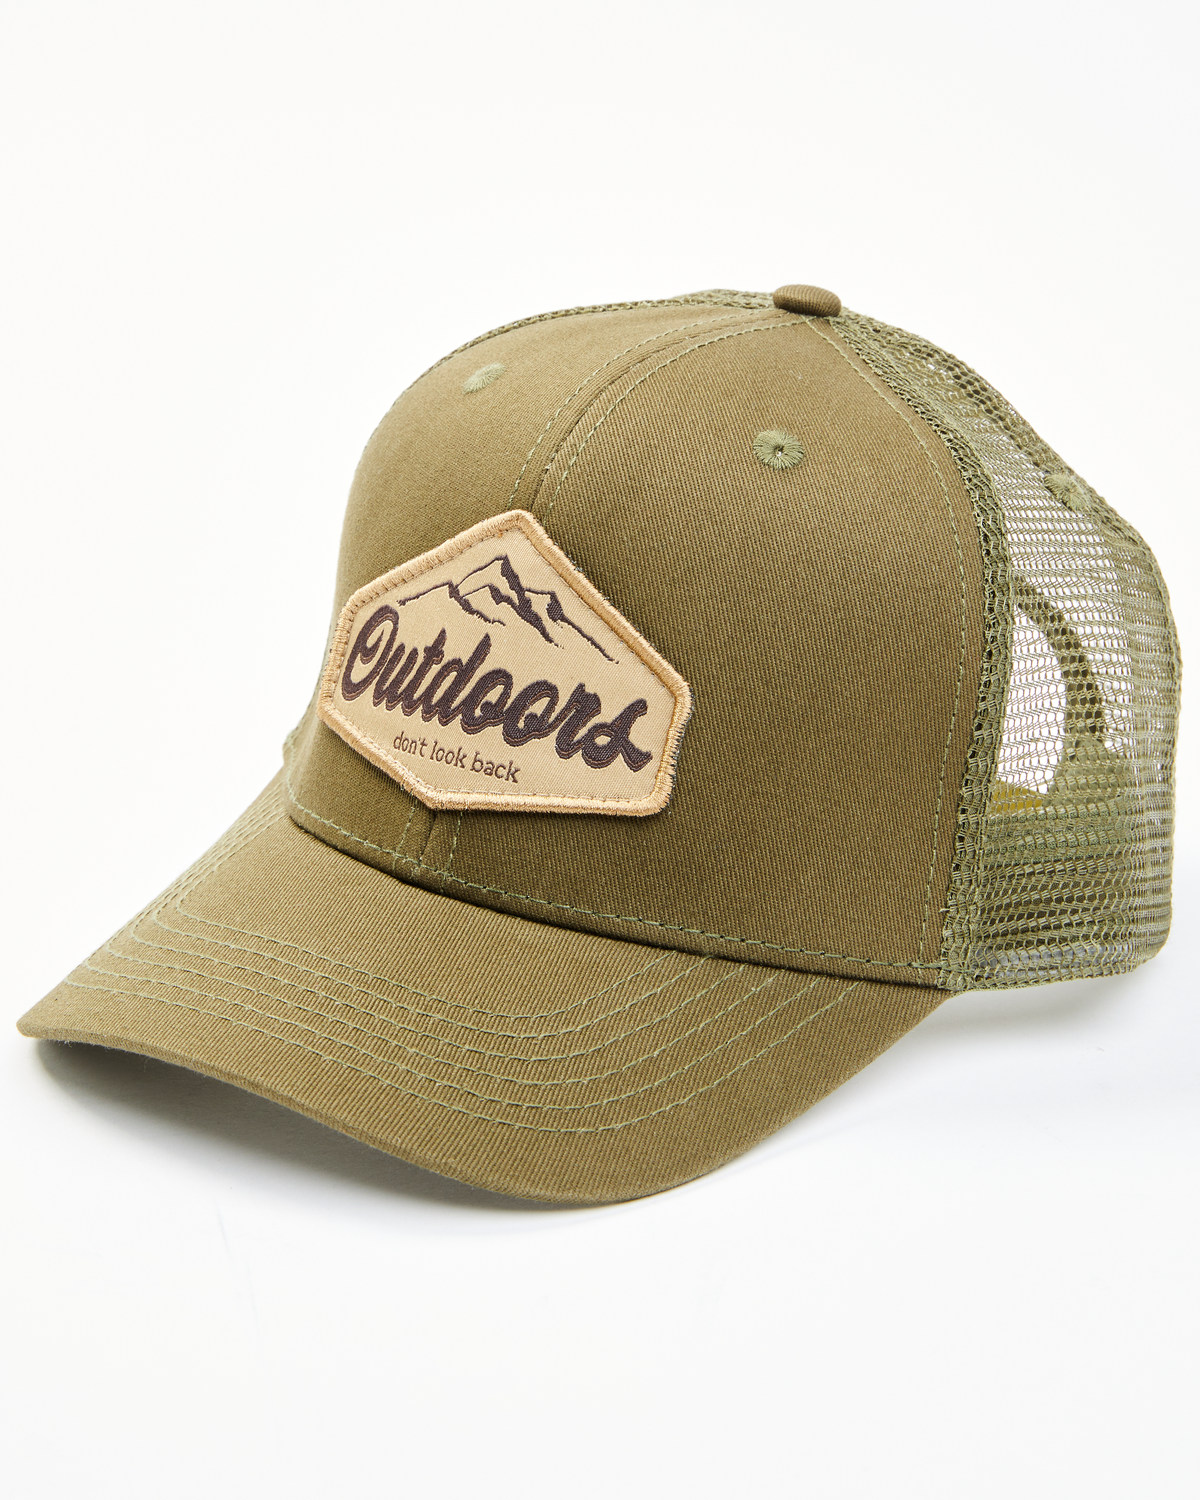 Brothers and Sons Men's Outdoors Don't Look Back Patch Ball Cap